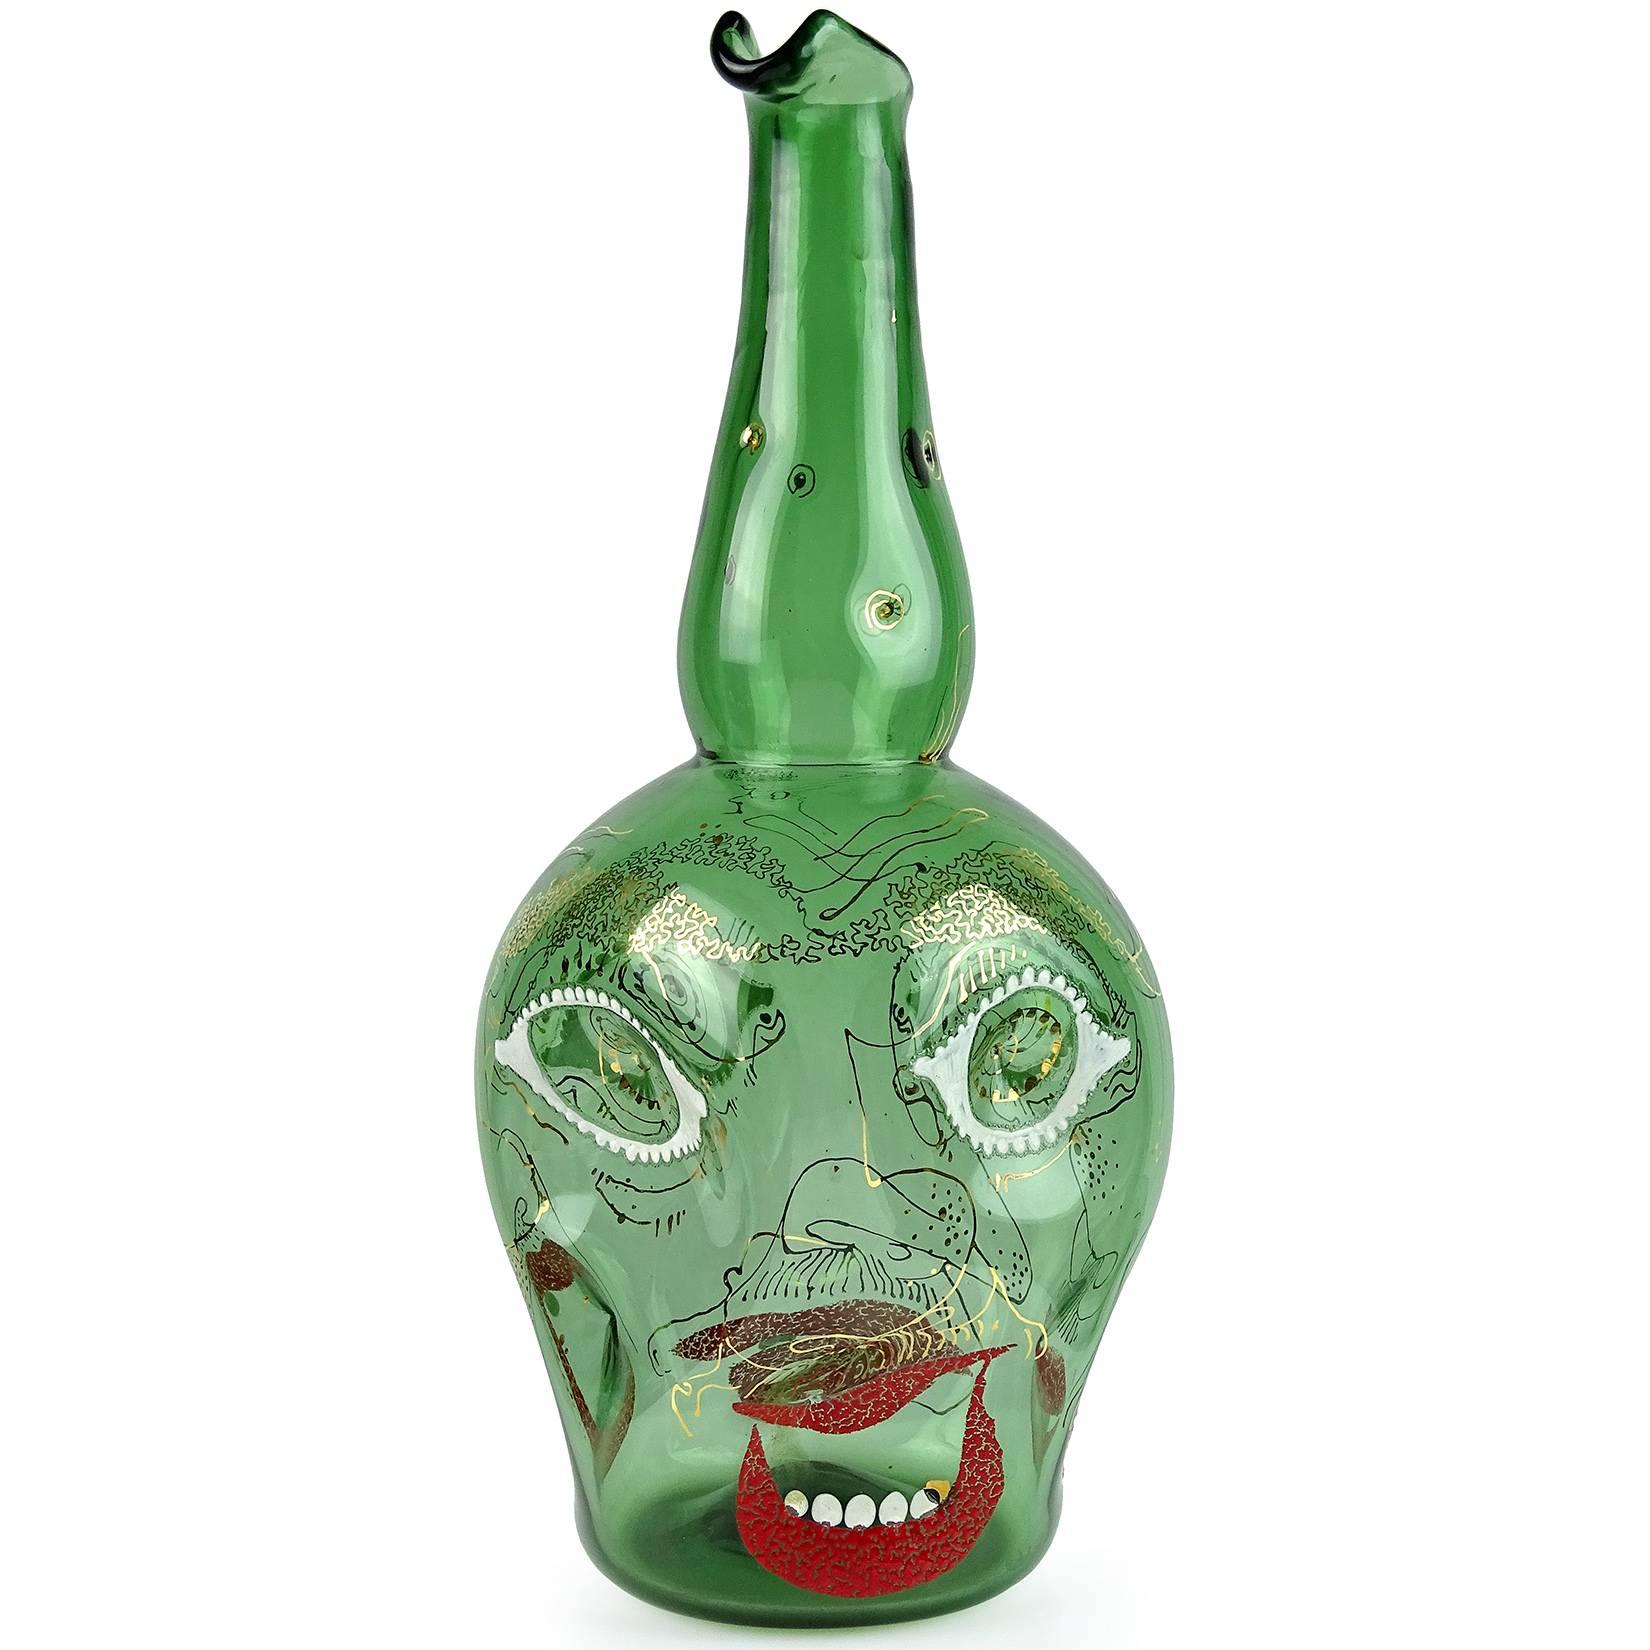 Free shipping worldwide! 

Rare Murano hand blown green Italian art glass large wine carafe or flower vase with enamel and gold gilt "Grotesque" changing faces. Documented to designer Anzolo Fuga circa 1947-1948. Similar pieces are